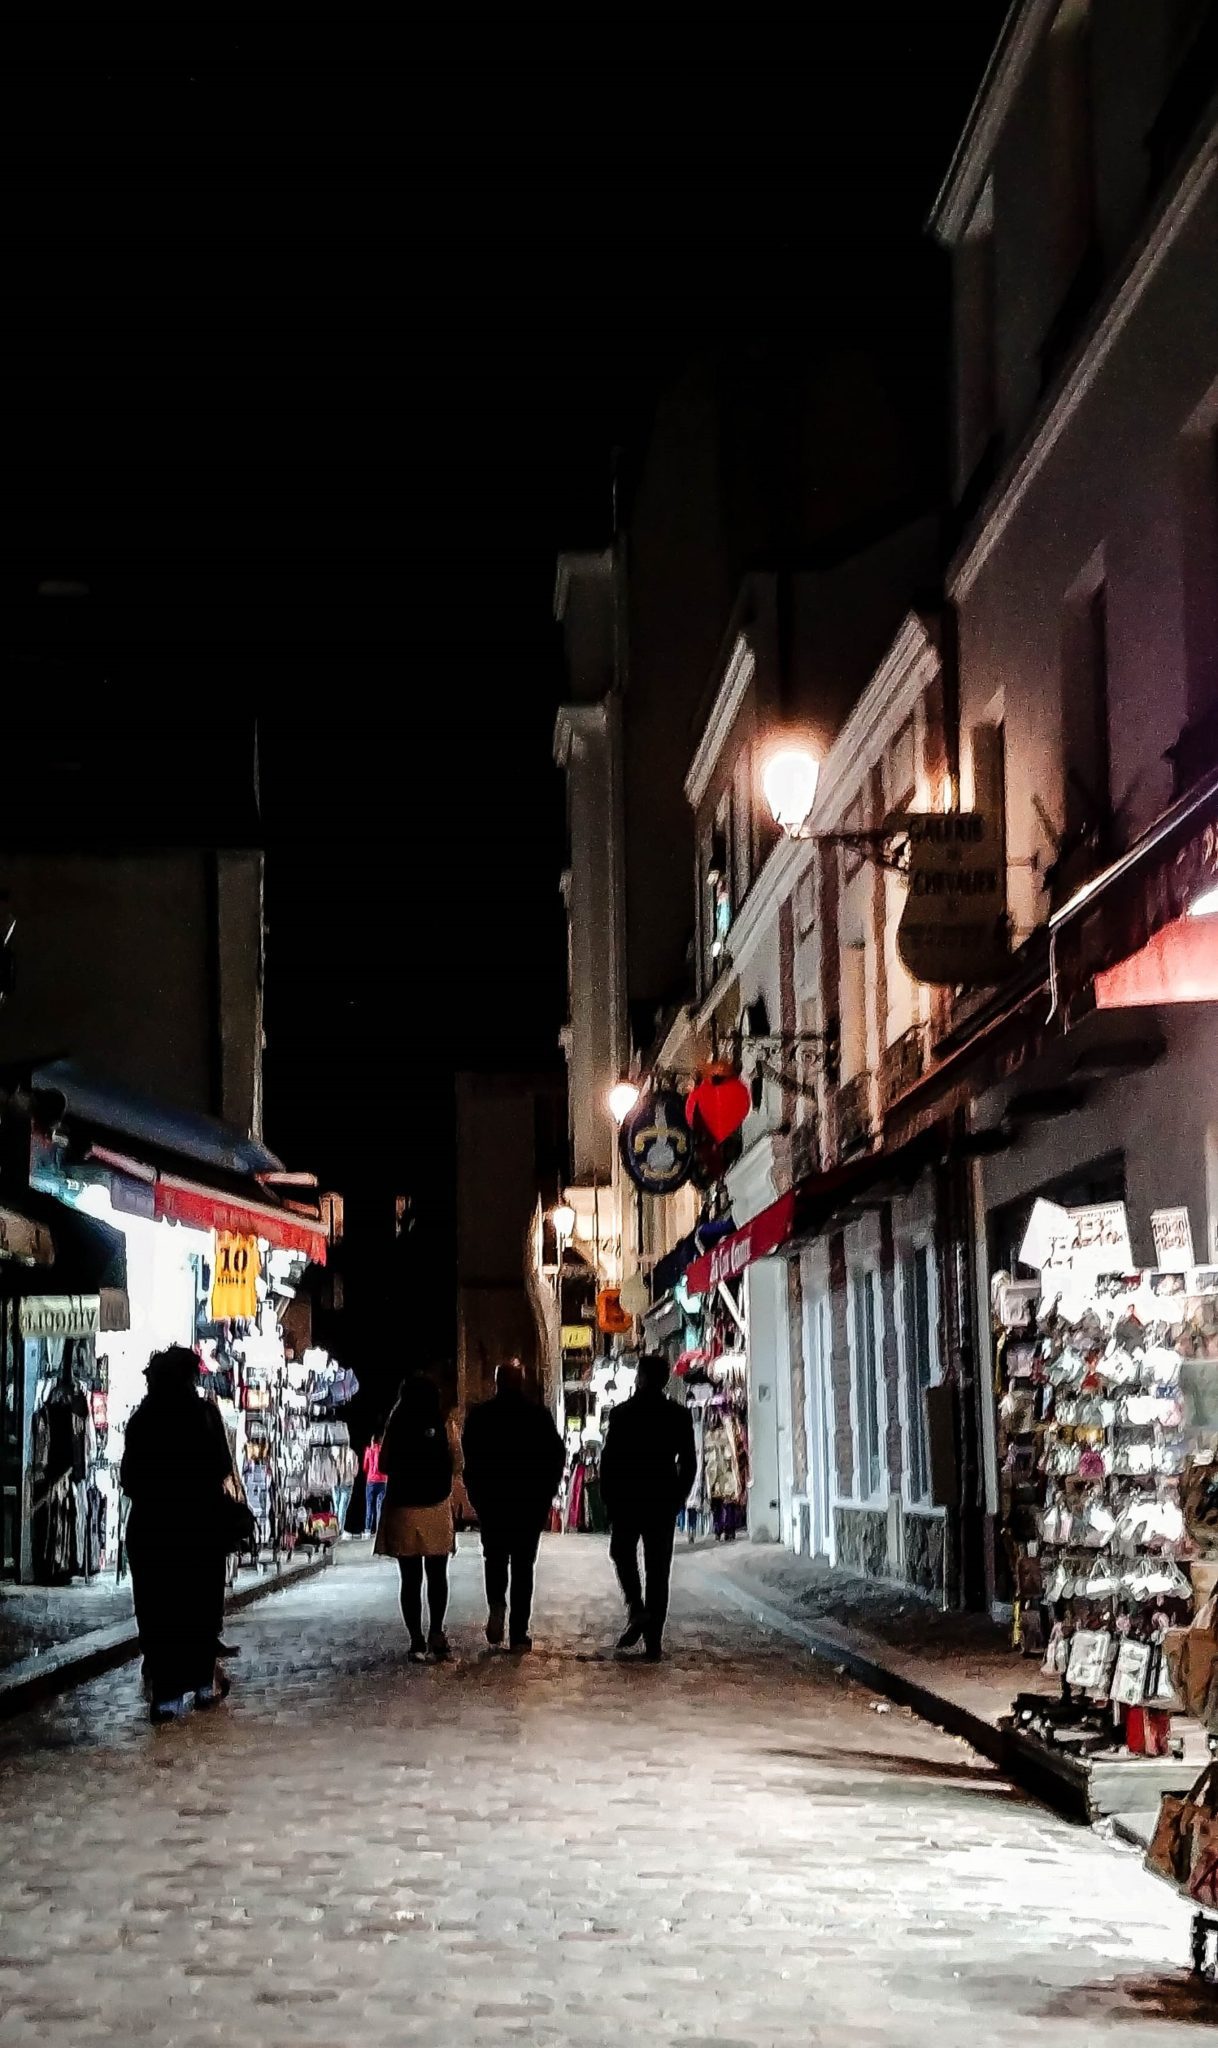 Walking the streets in Montmartre at night